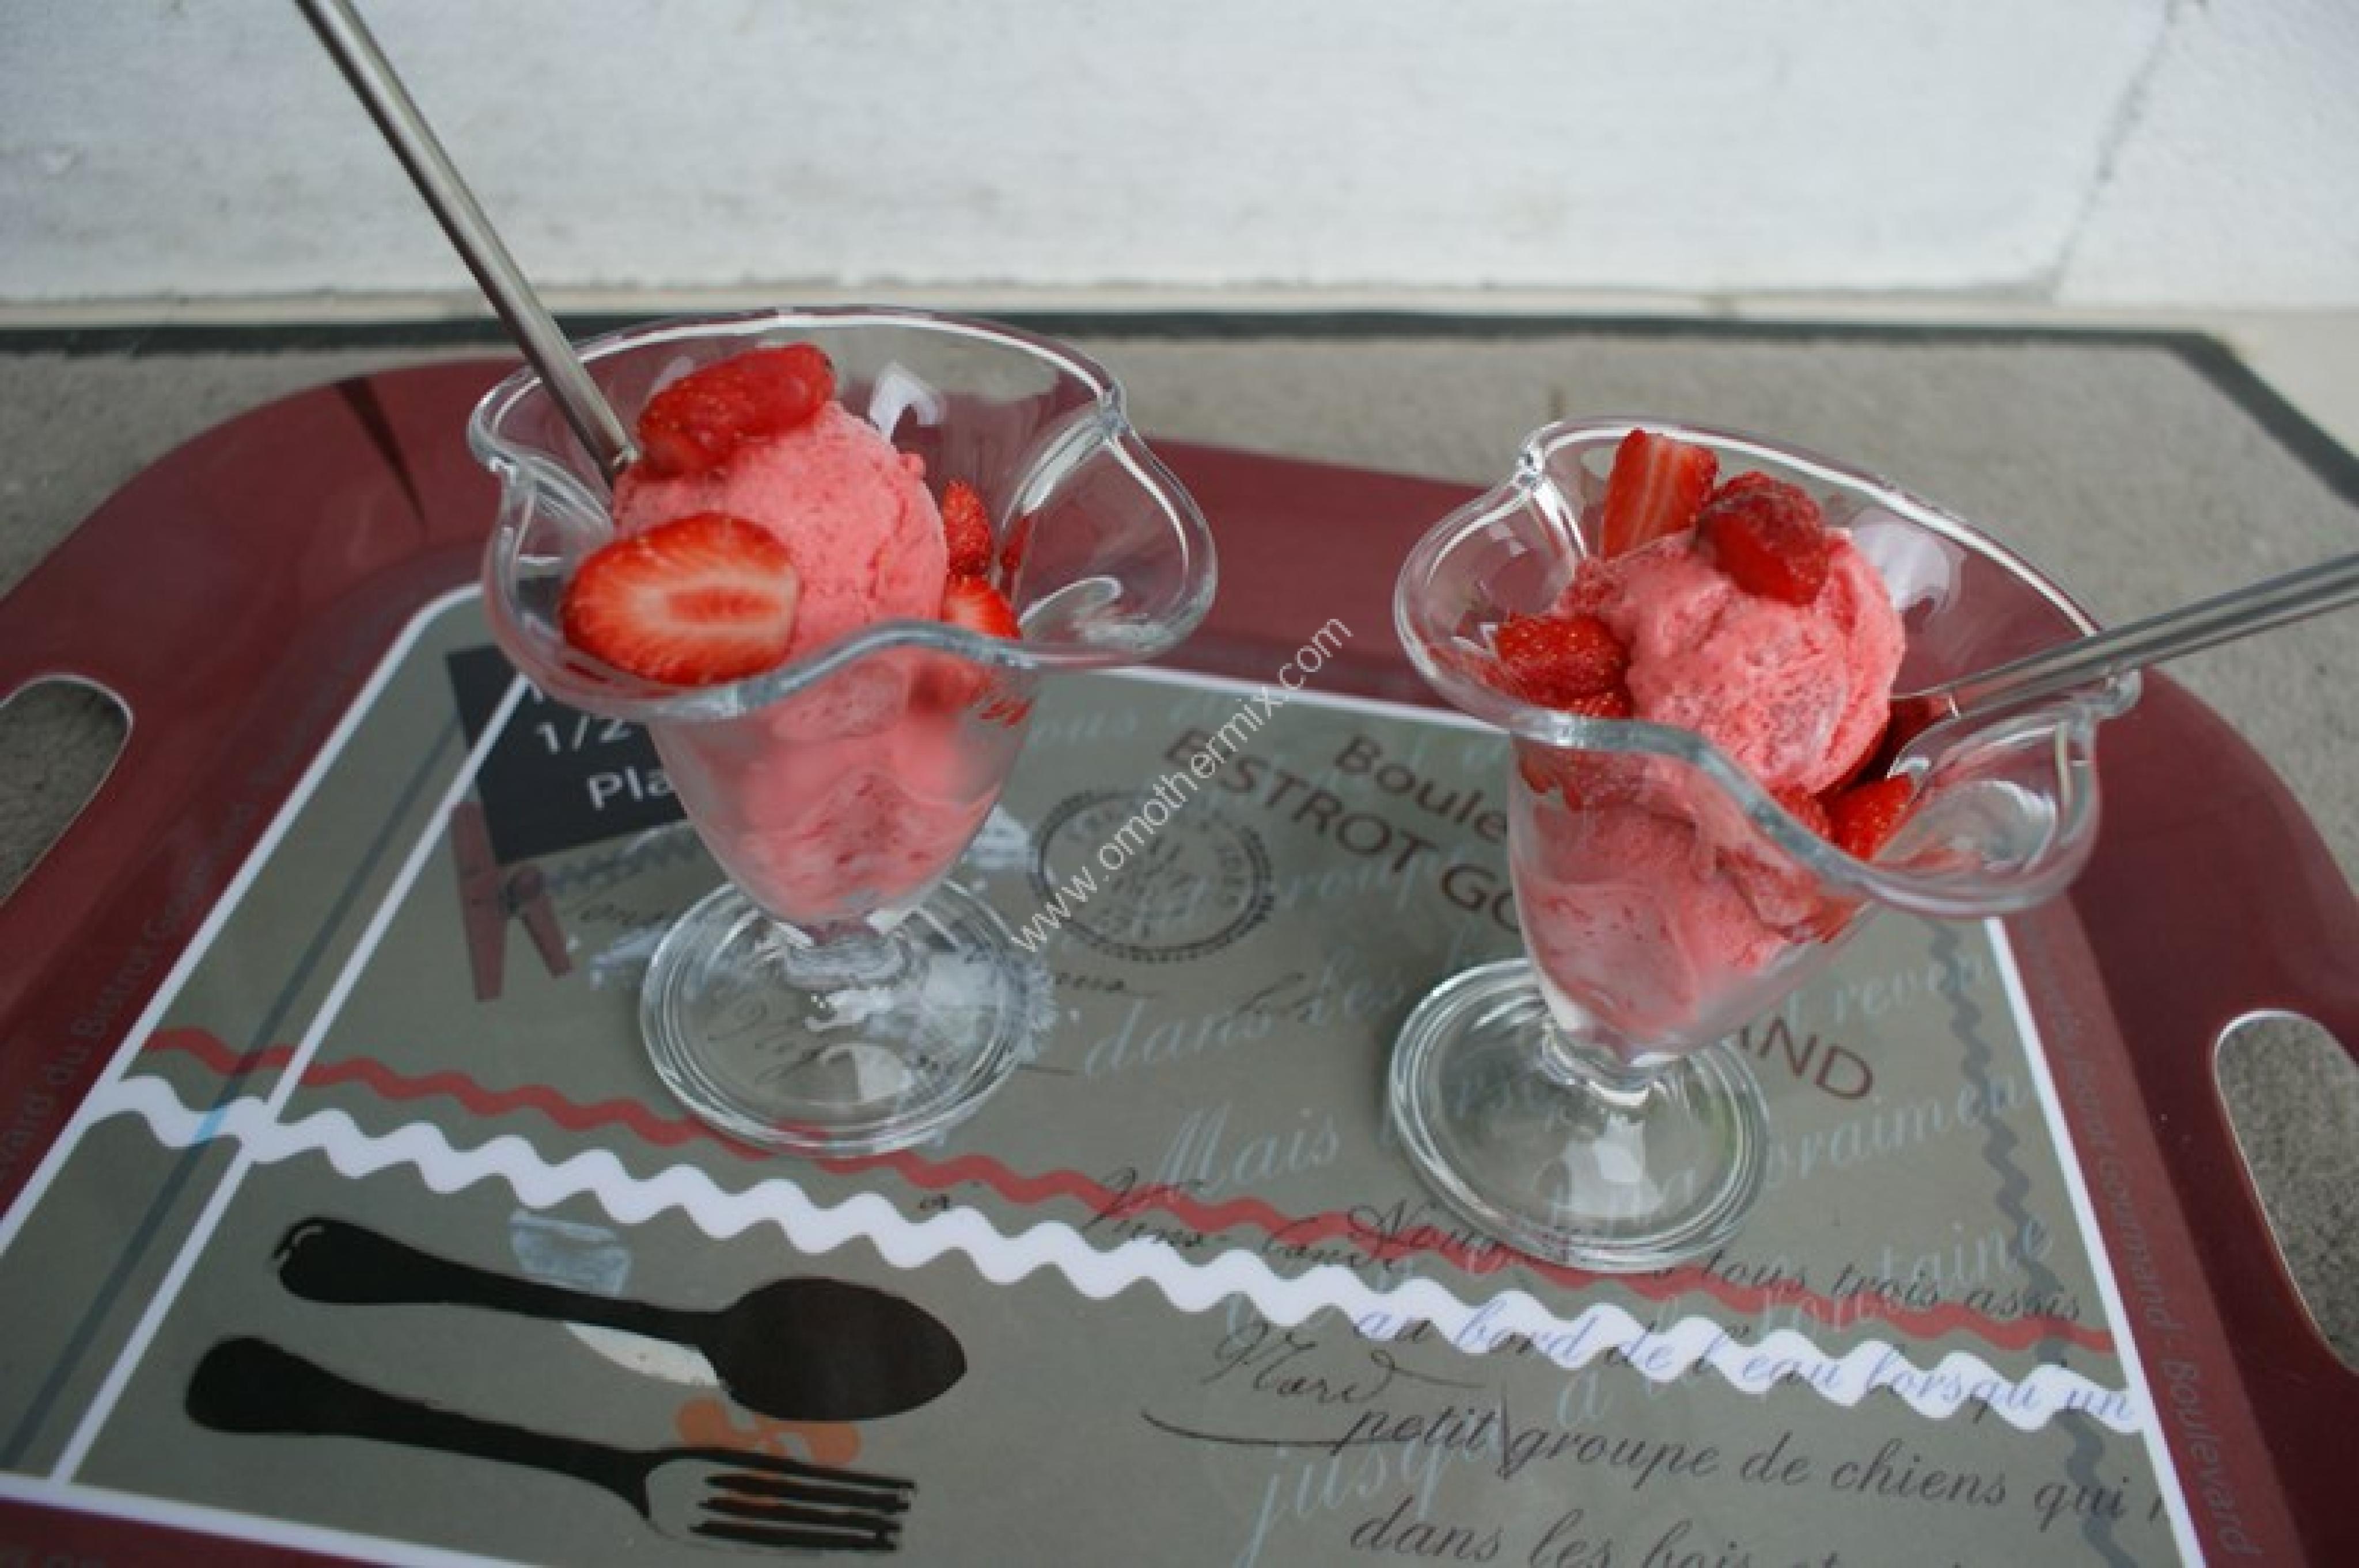 Homemade strawberry Petit Suisse - Thermomix Recipes